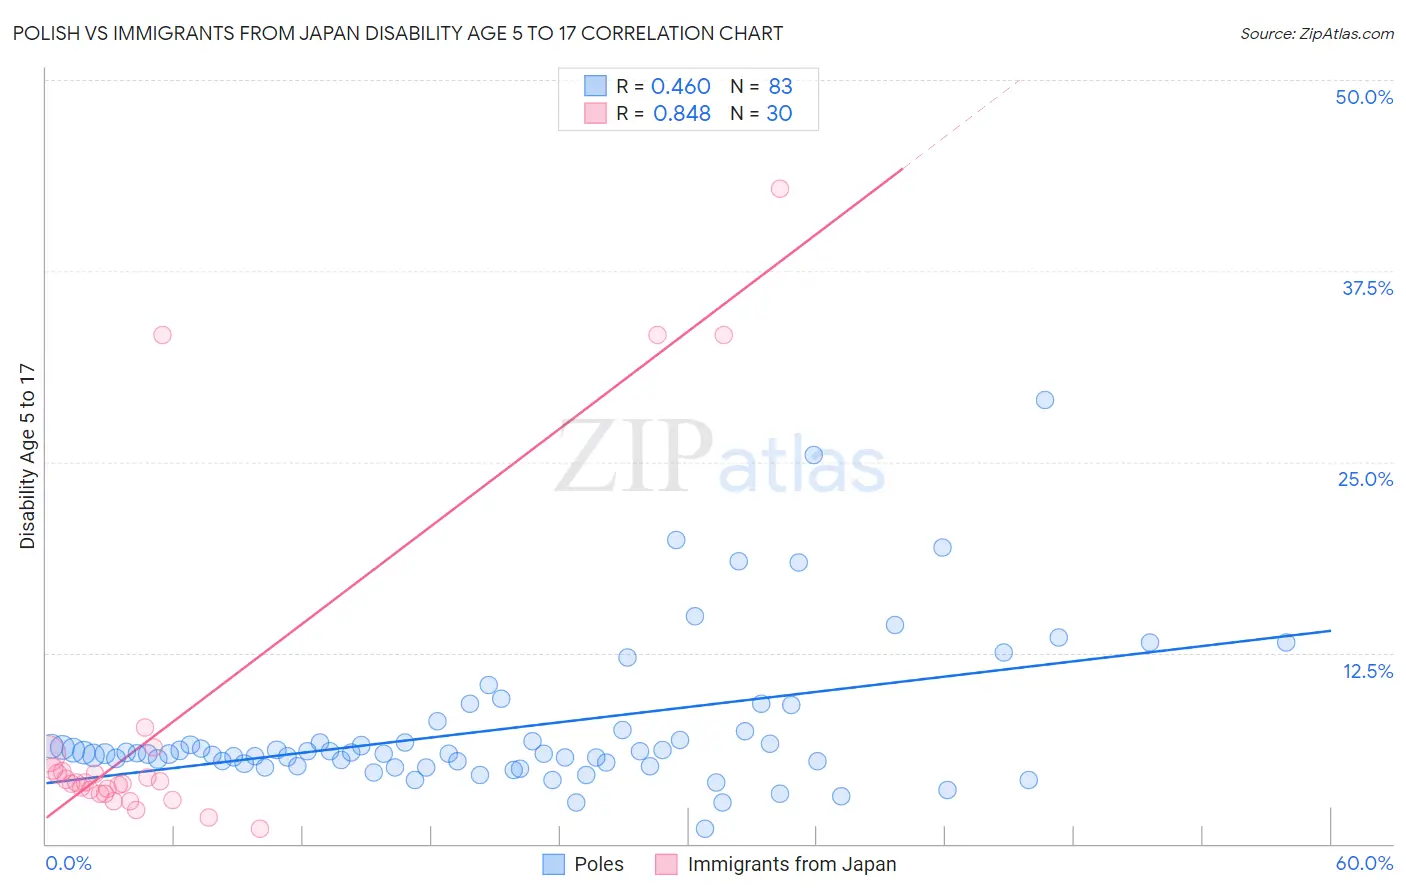 Polish vs Immigrants from Japan Disability Age 5 to 17